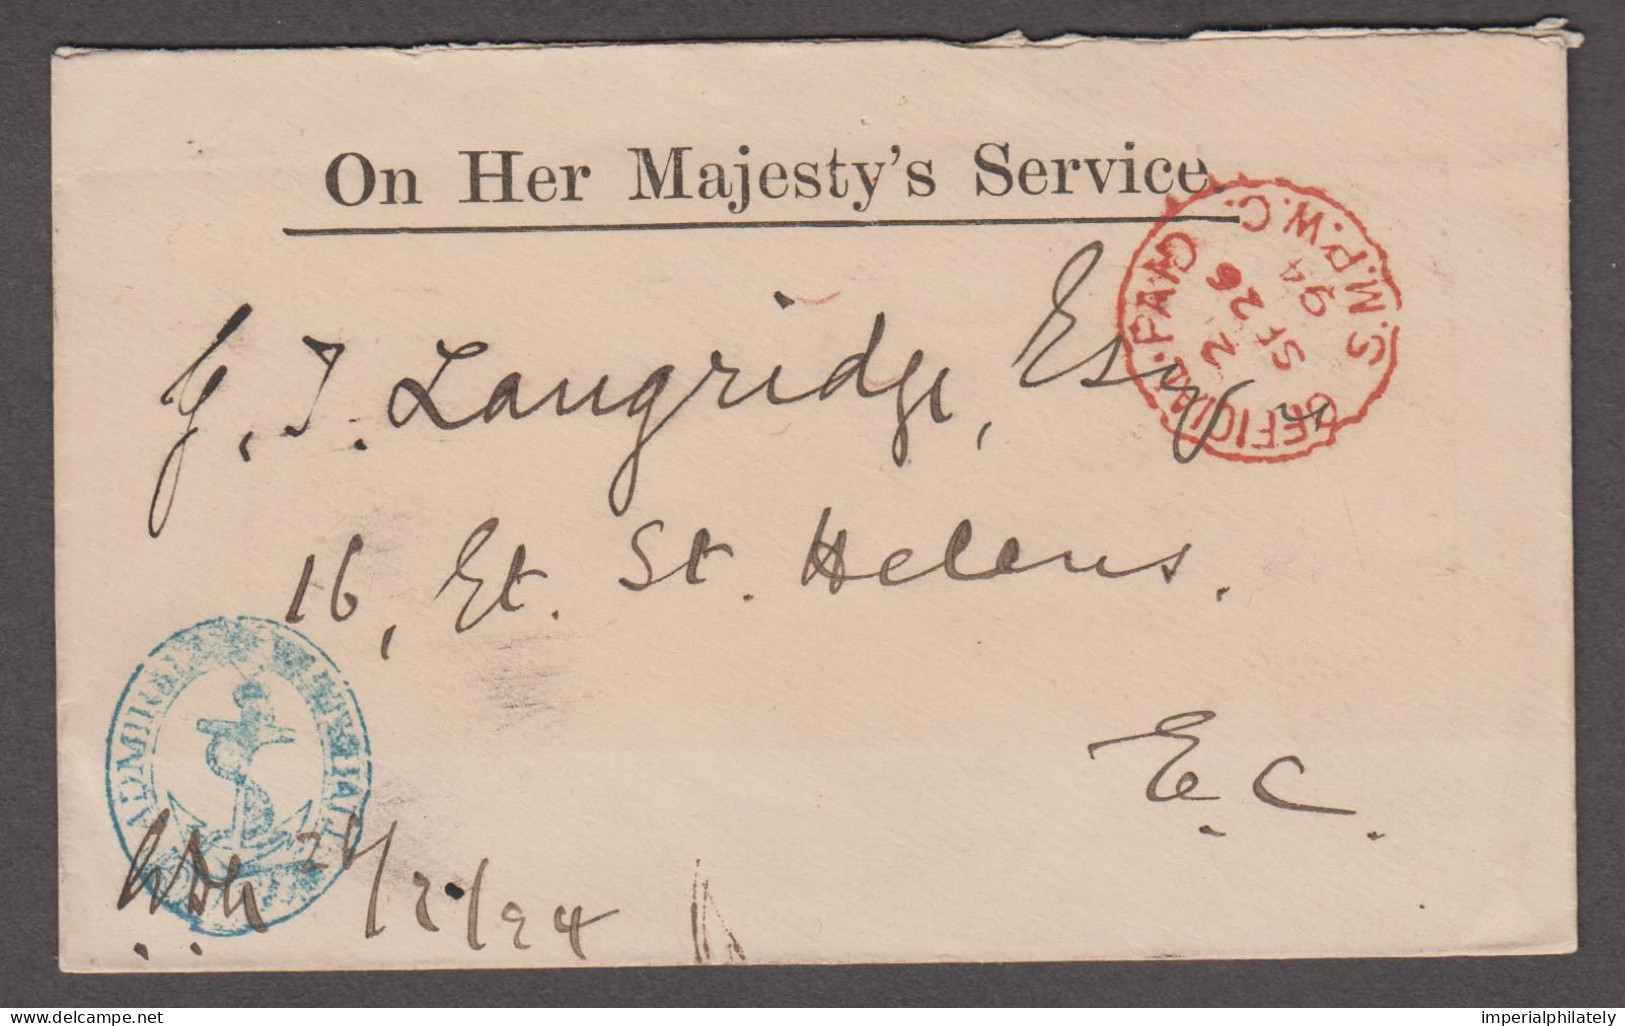 1894 (Sep 26) OHMS Envelope With "Admiralty Whitehall" Anchor Cachet And Official Paid Cds, Fine - Servizio